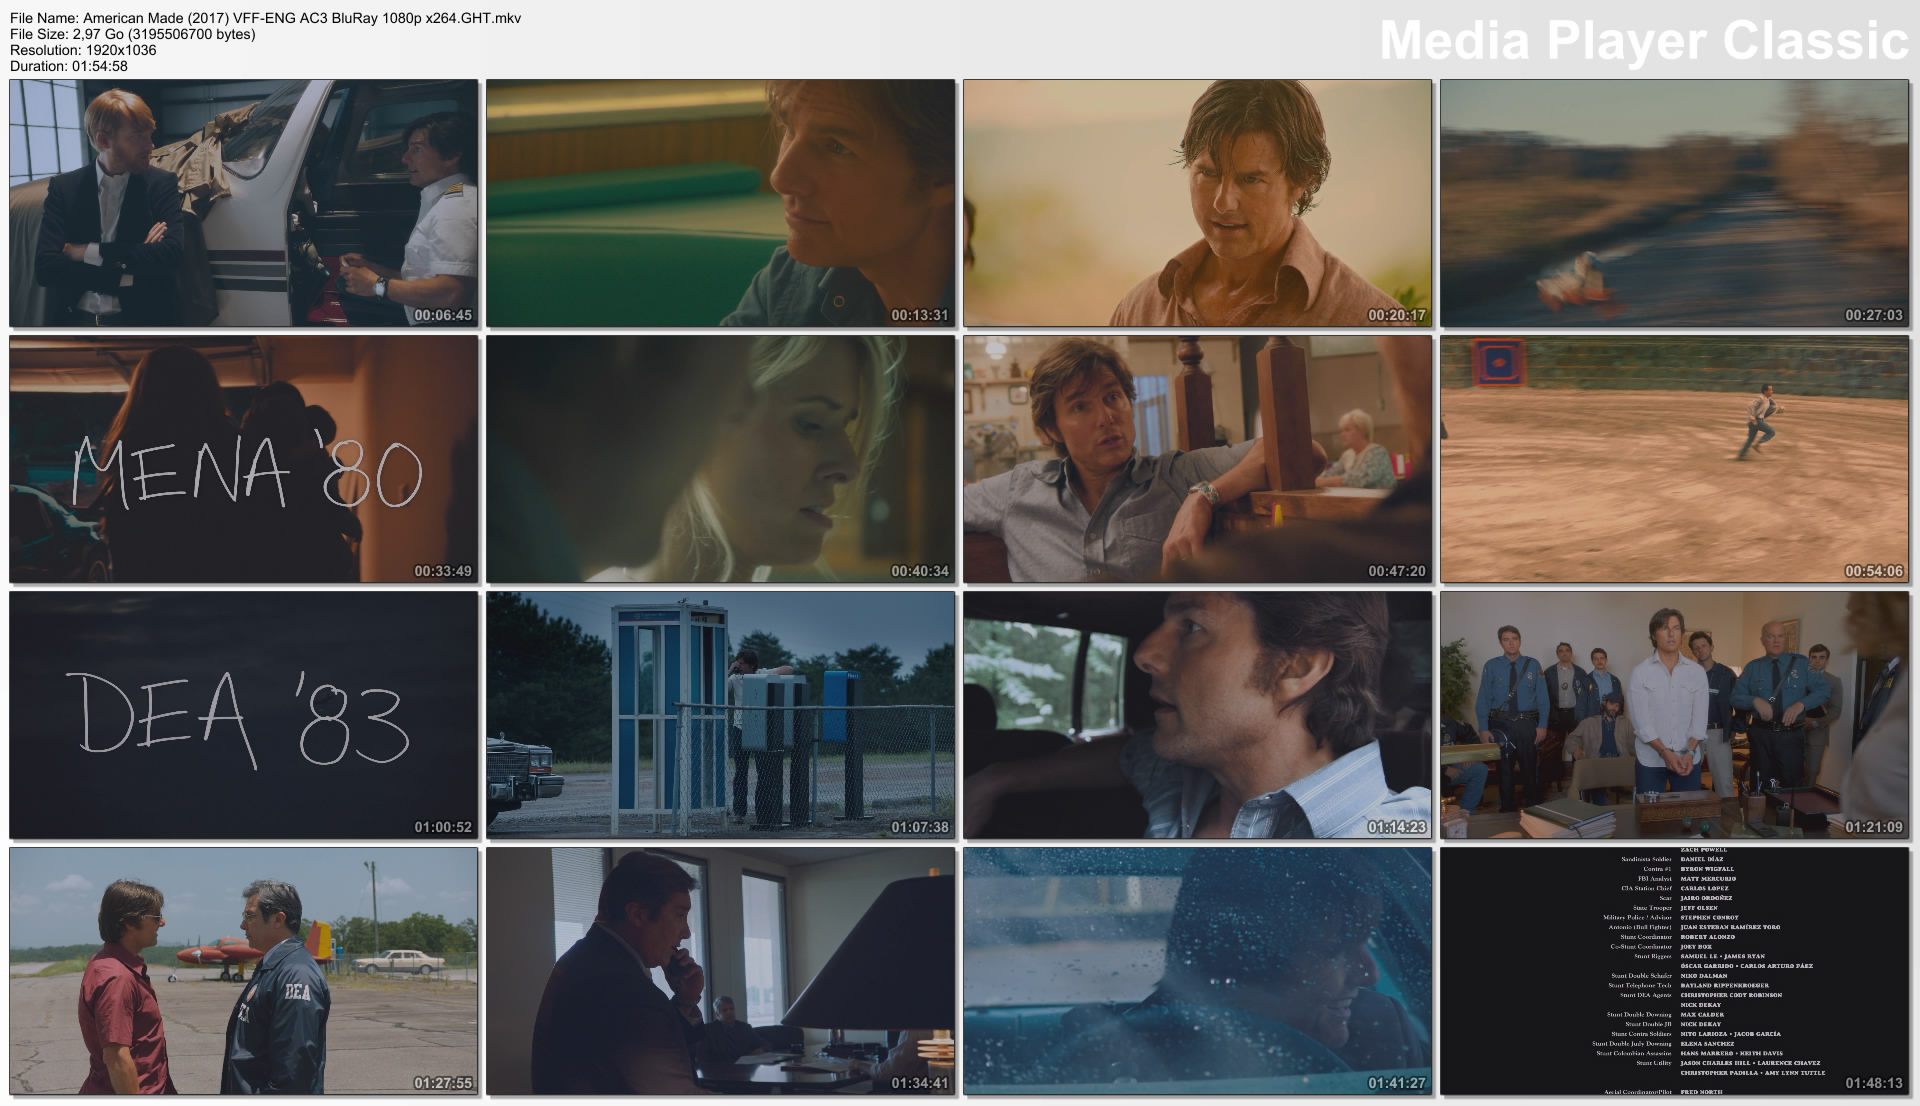 American Made (2017) VFF-ENG AC3 BluRay 1080p x264.GHT